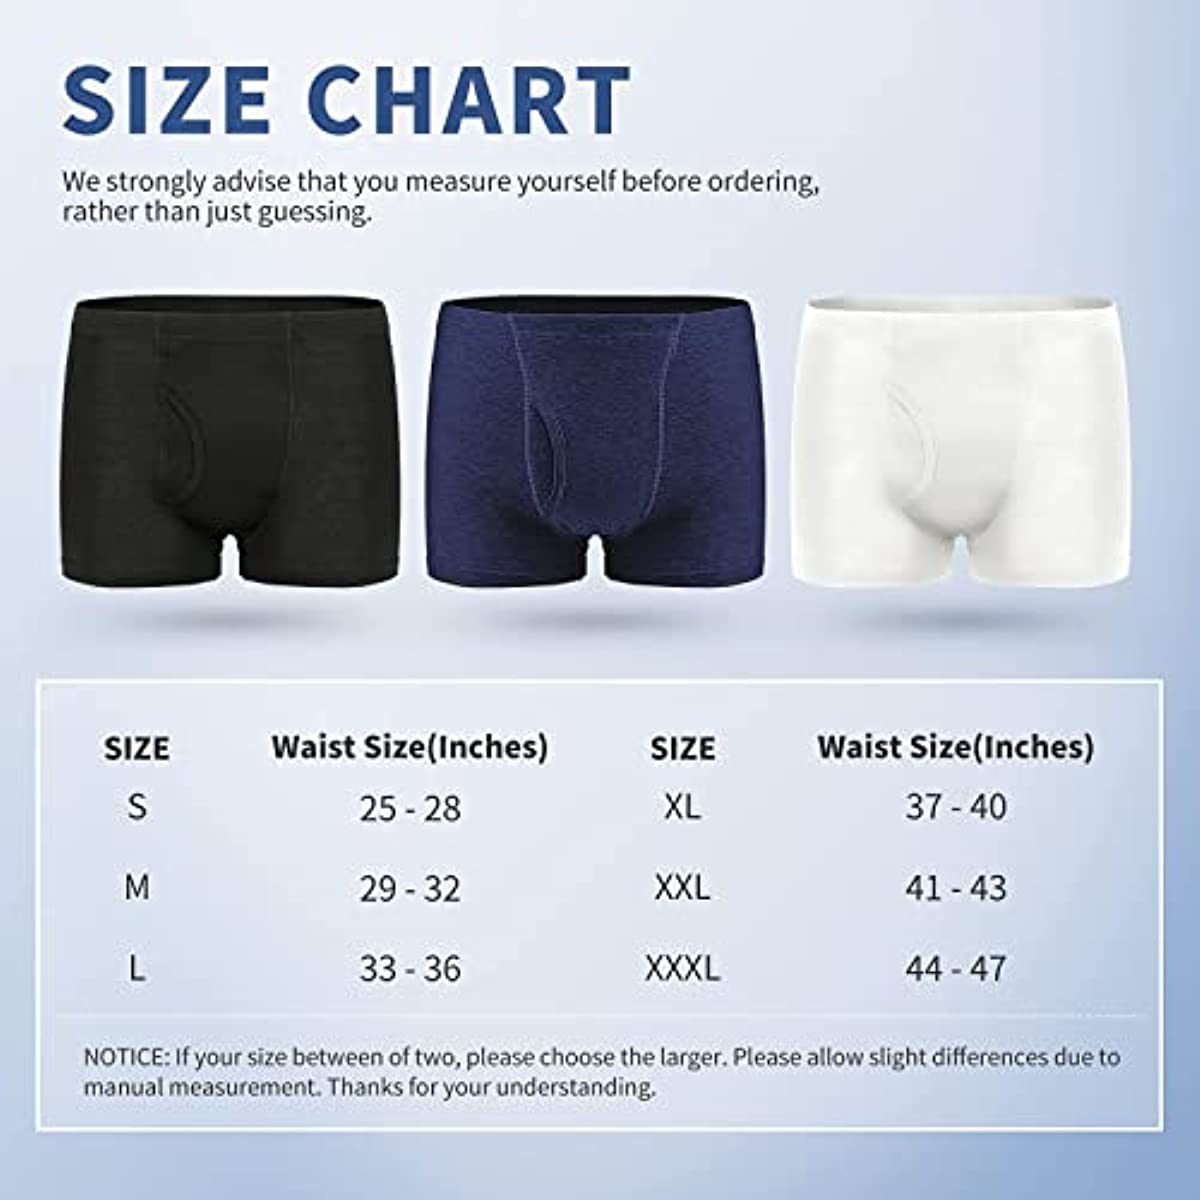 Incontinence Underwear for Men Washable Leakproof Super Absorbency Urinary Incontinence Briefs 2pcs